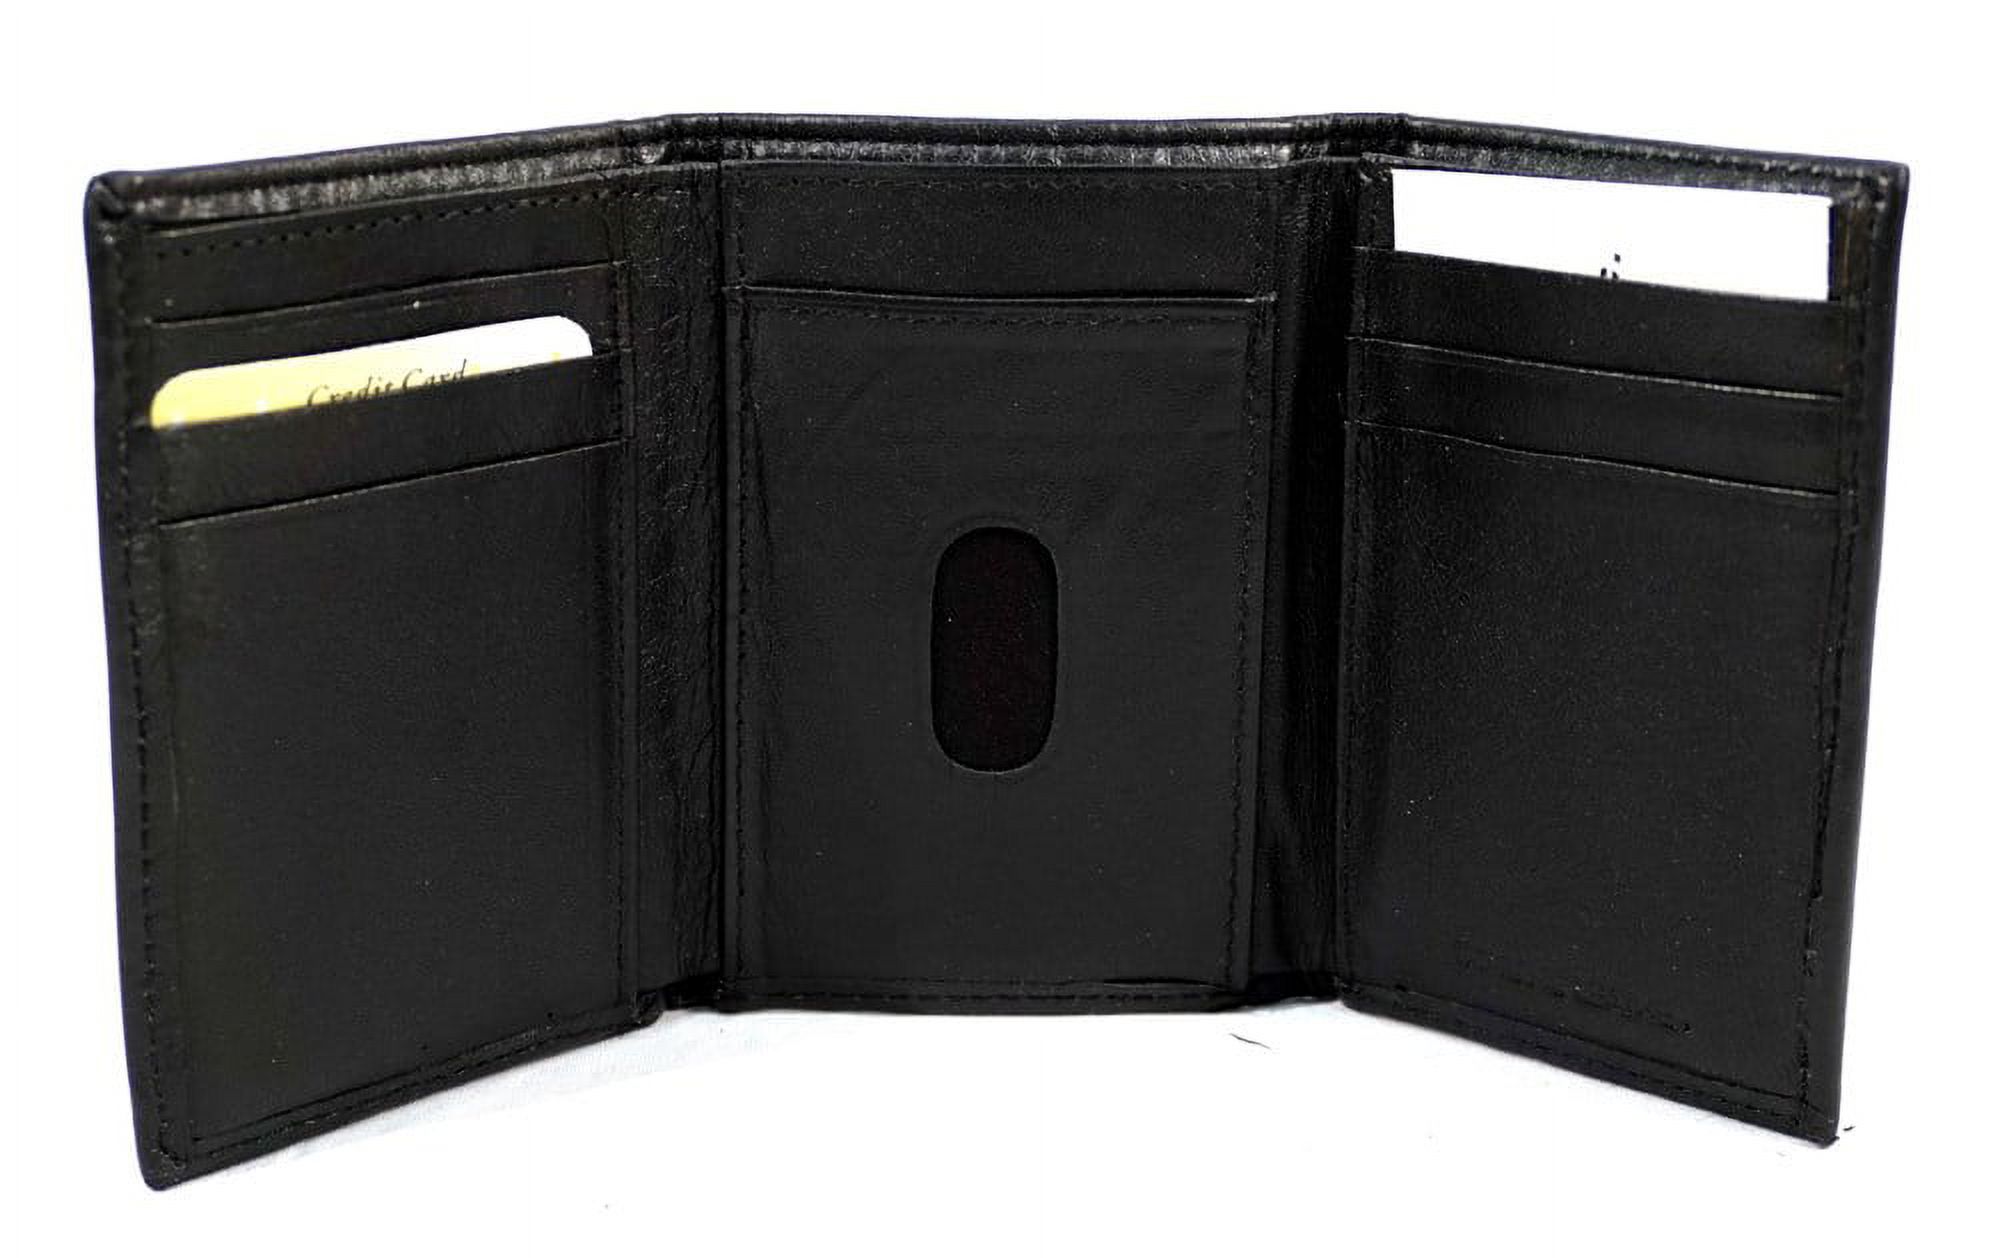 South Carolina NCAA Gamecocks Embroidered Black Leather Trifold Wallet - image 2 of 2